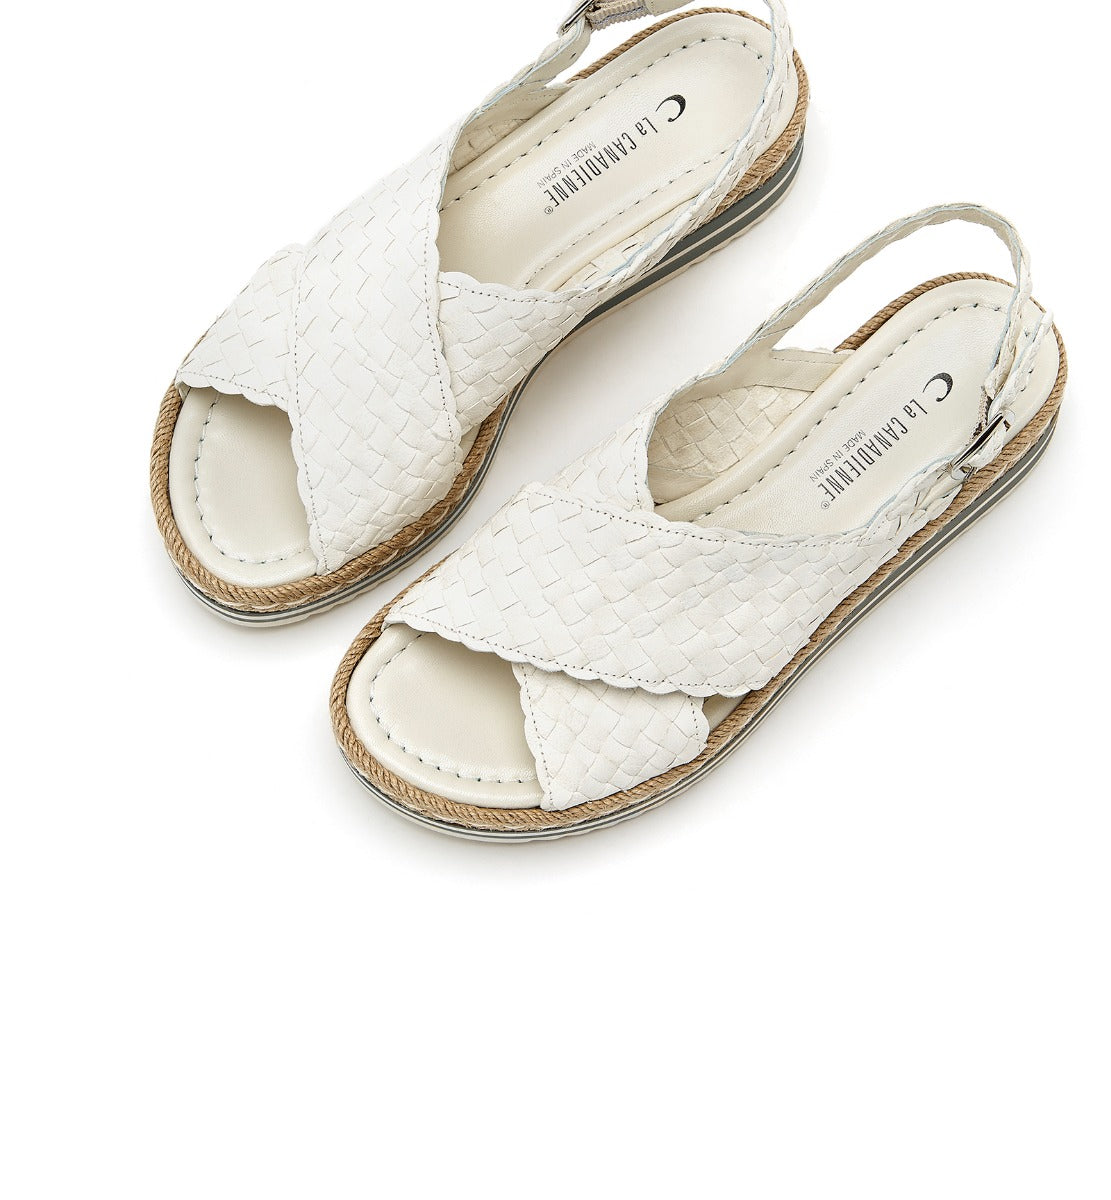 Padova Woven Leather Sandal in White